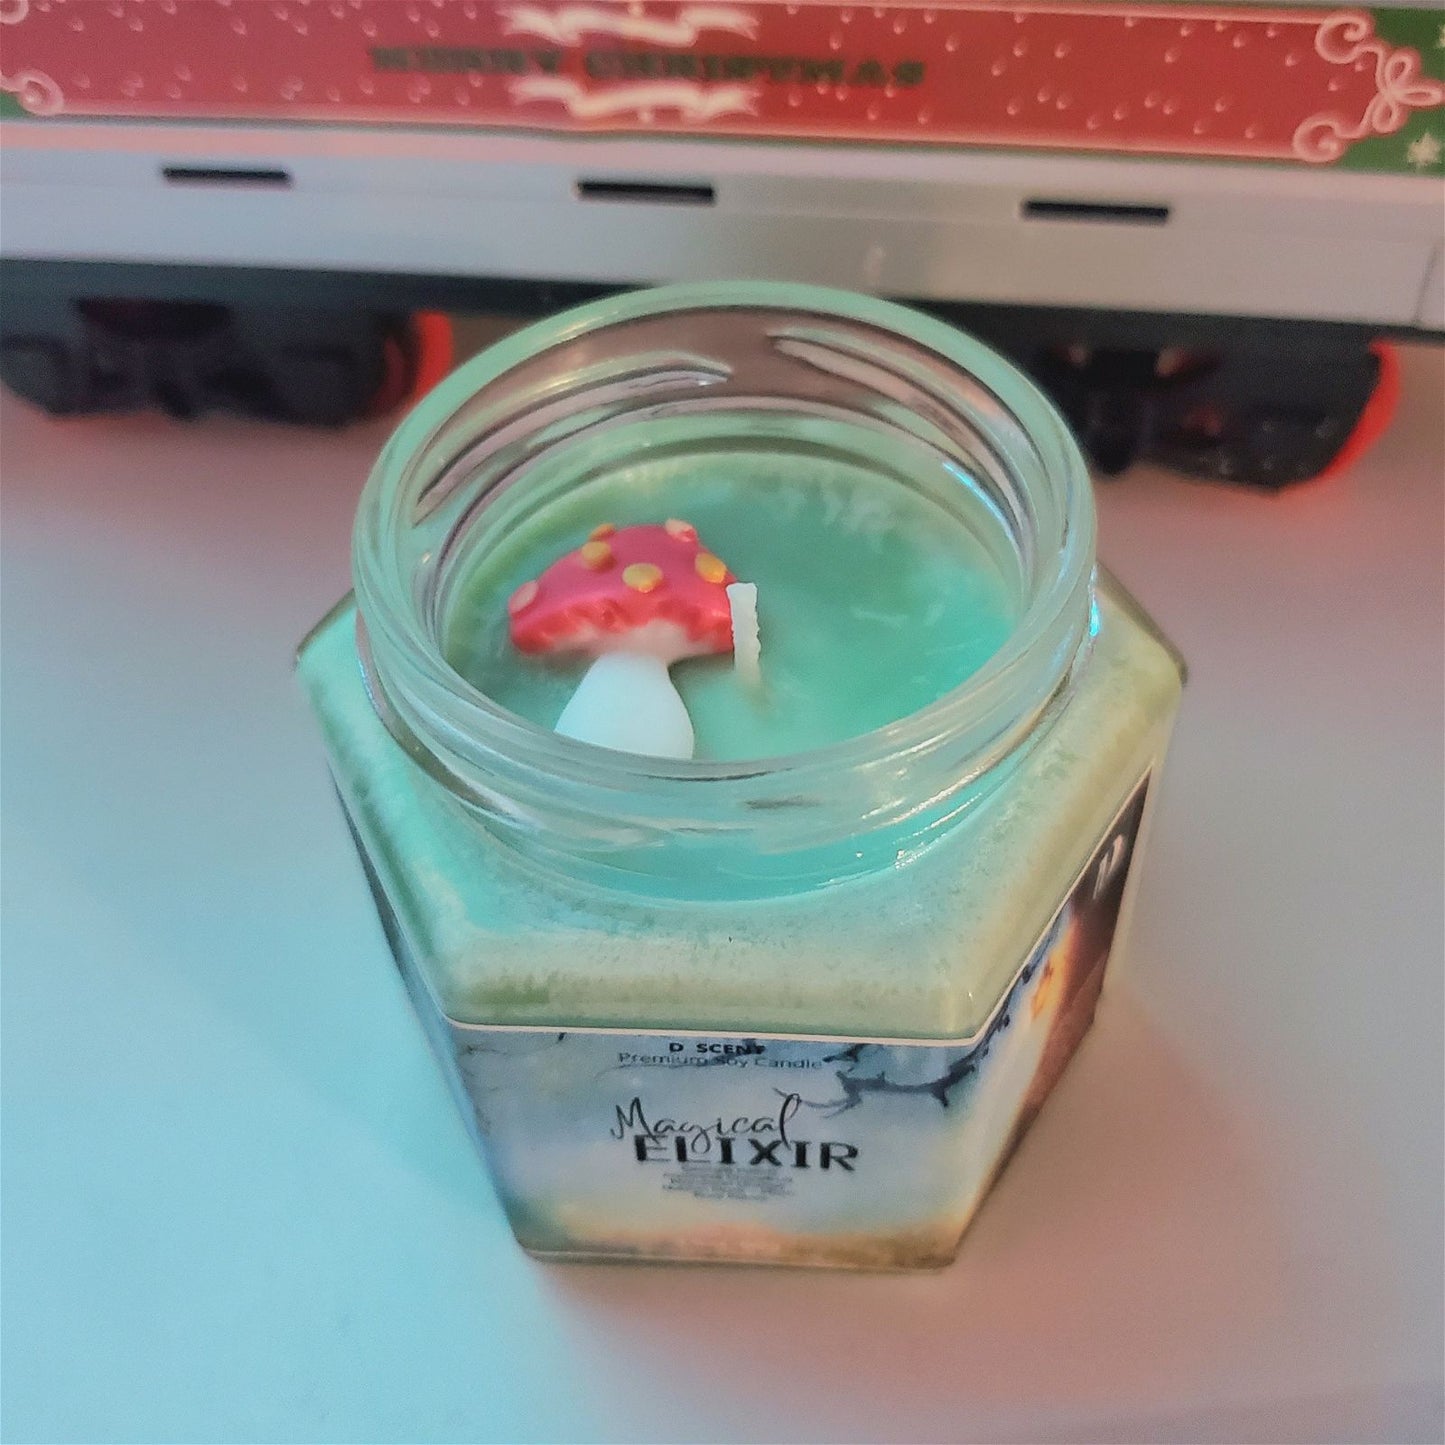 Magical ELIXIR Soy Wax Candle | Small Hex - D SCENT 